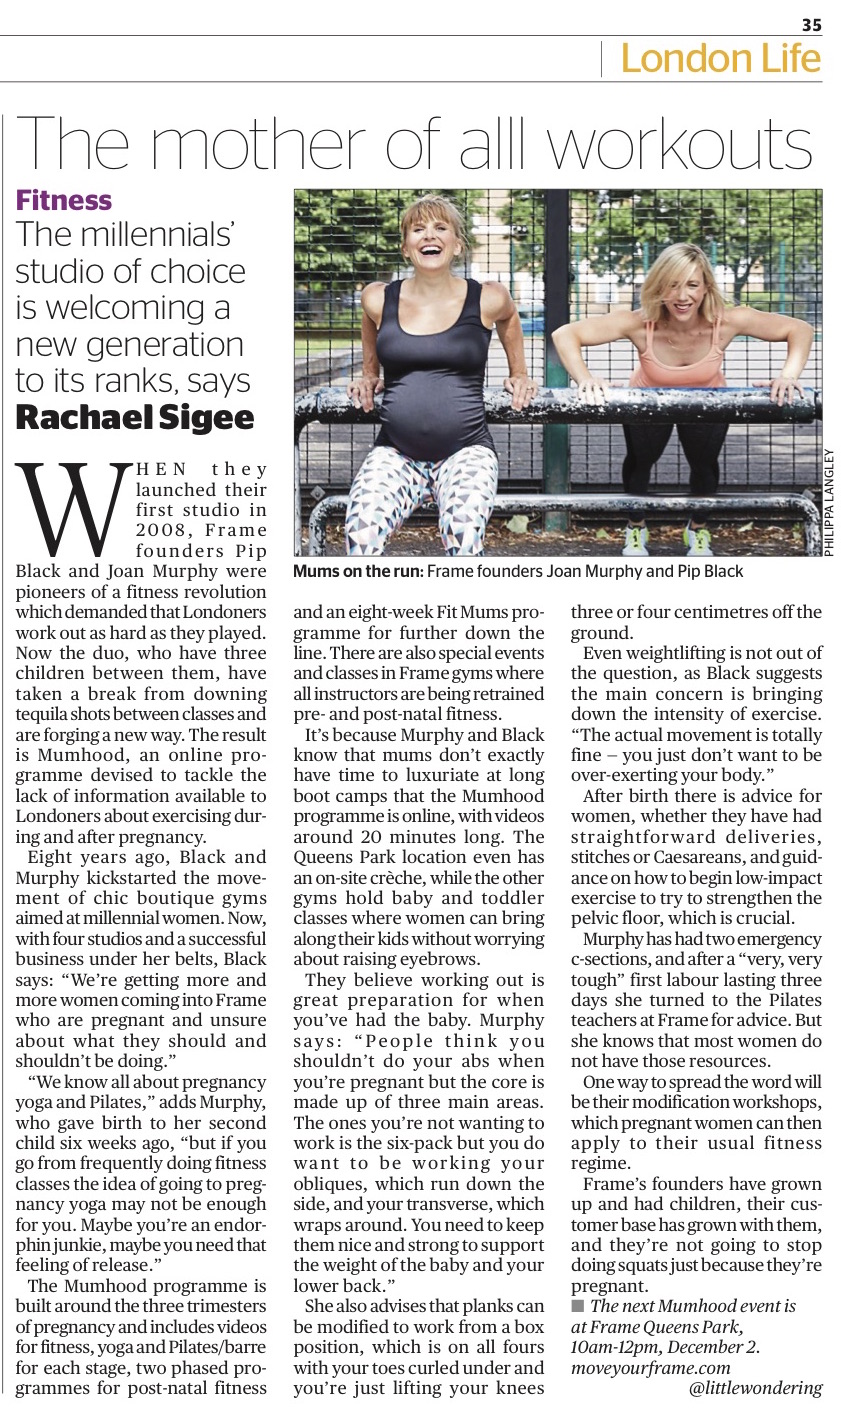 Feature on pregnancy and motherhood exercise